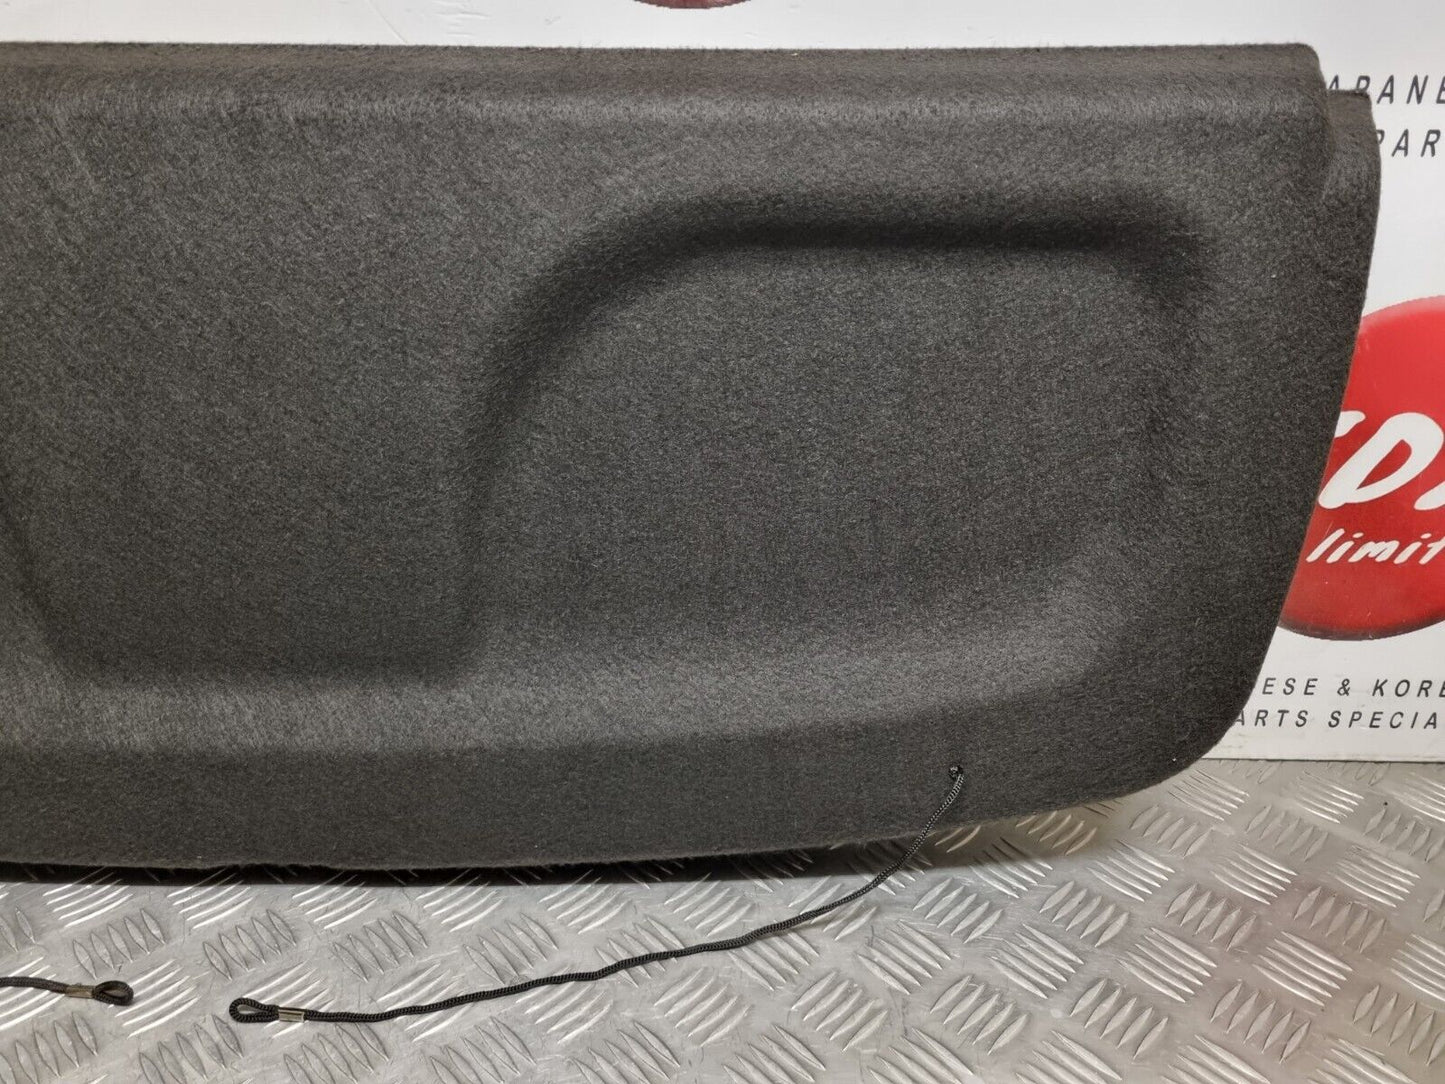 TOYOTA YARIS MK3 2012-2017 NEW PARCEL SHELF LUGGAGE LOAD COVER PRIVACY BLIND